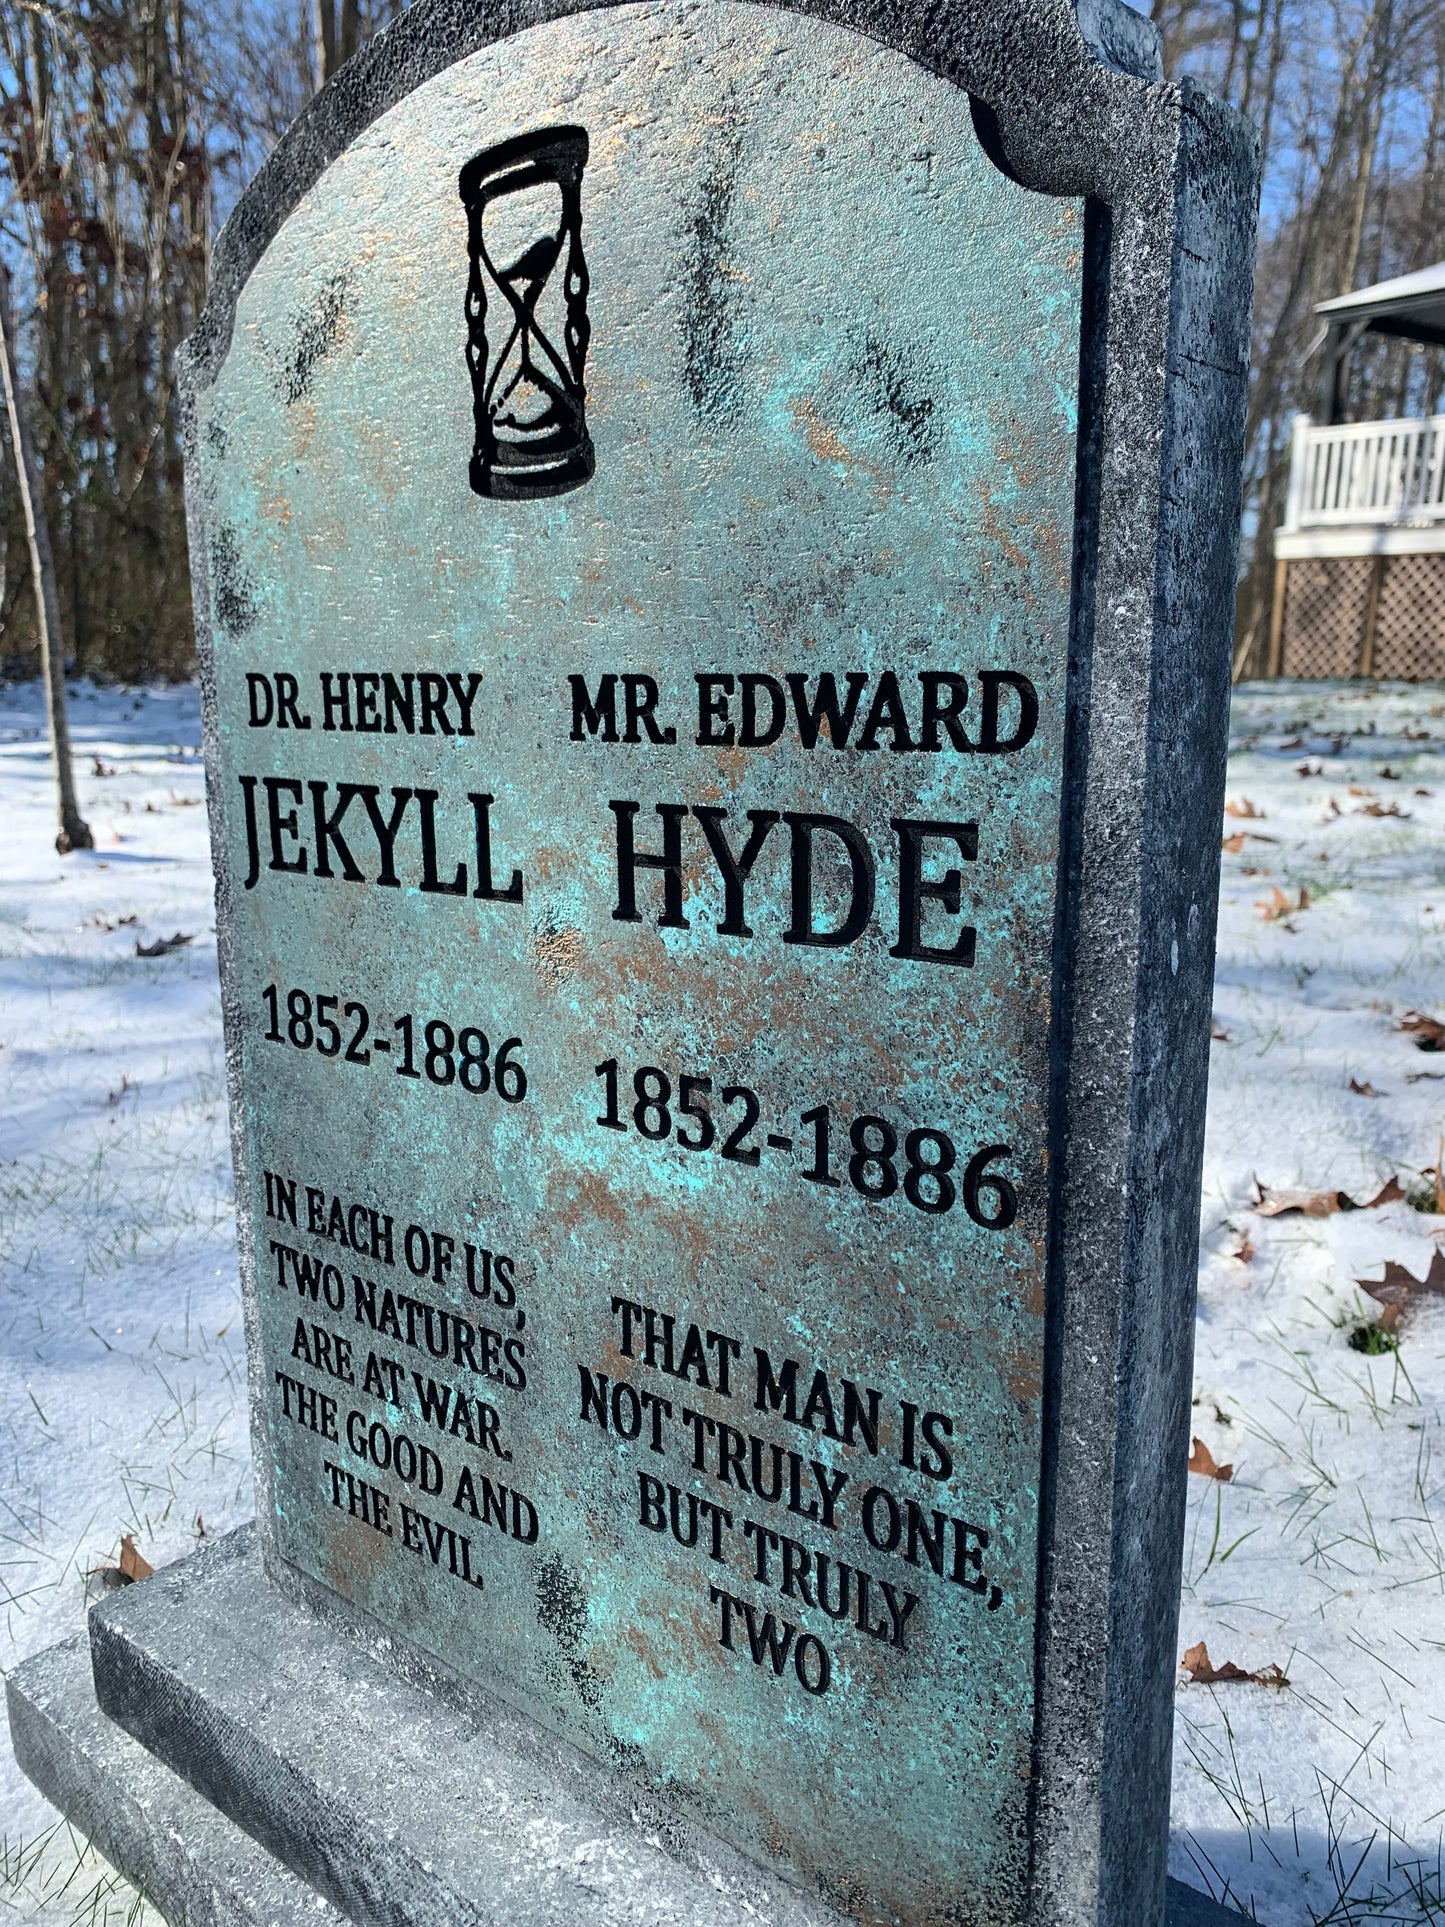 Dr. Henry Jekyll and Mr. Edward Hyde Halloween Tombstone